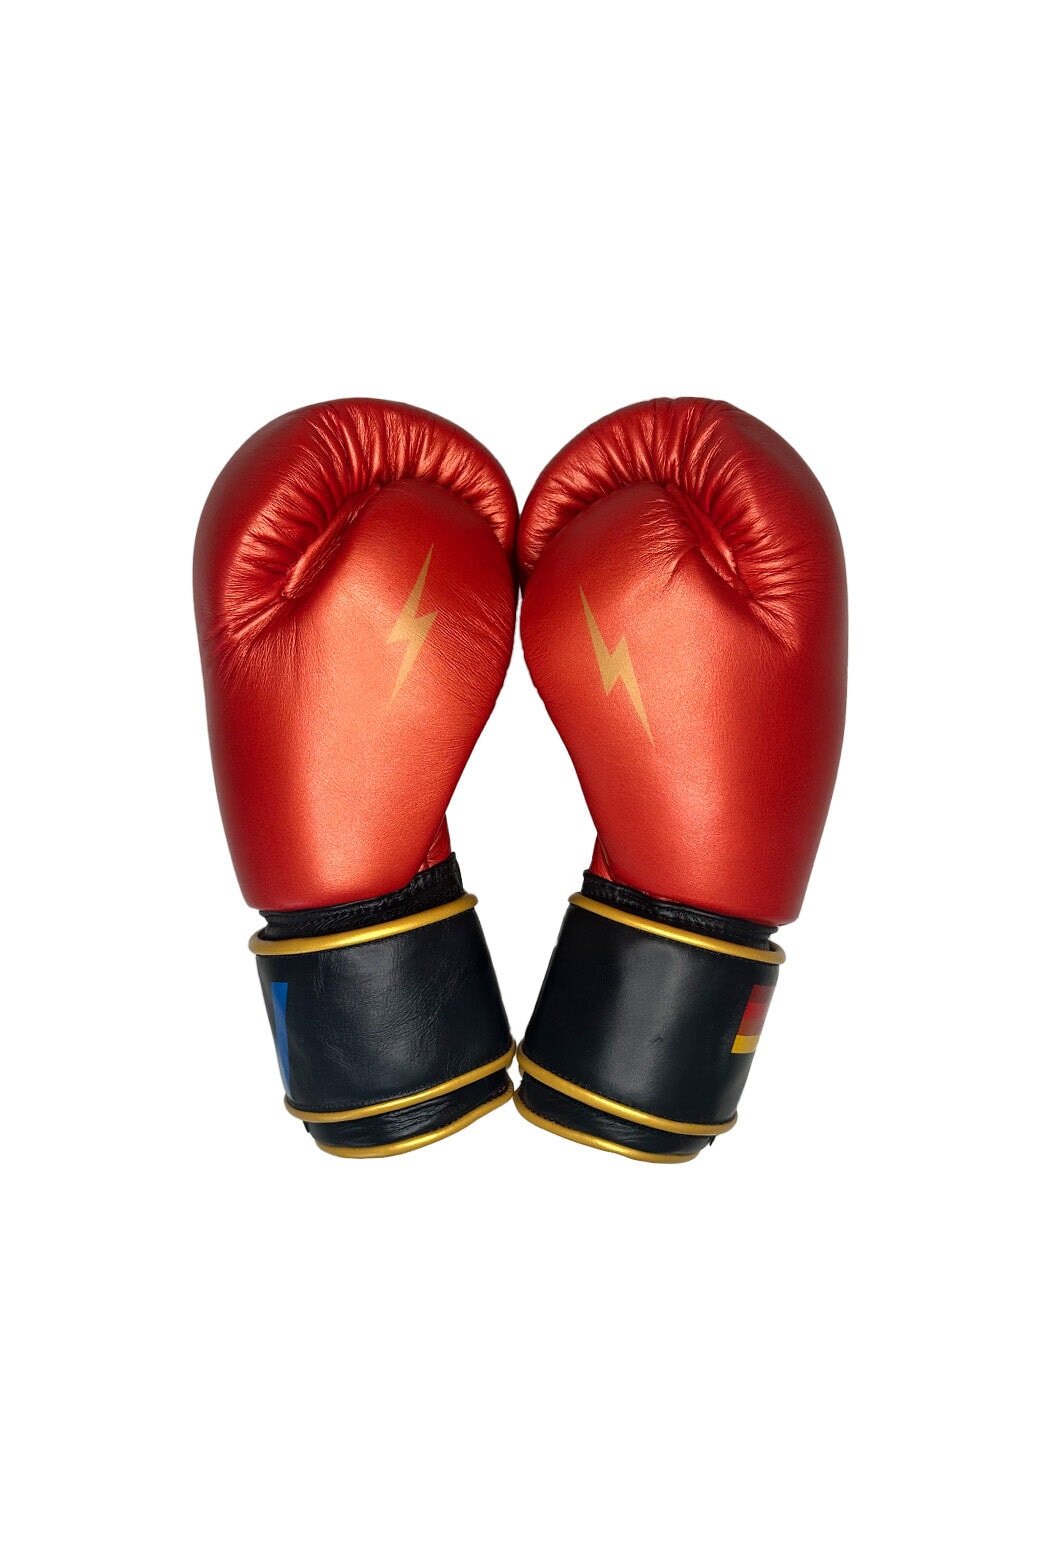 BOXING GLOVES - RED // GOLD Boxing Gloves Aviator Nation 